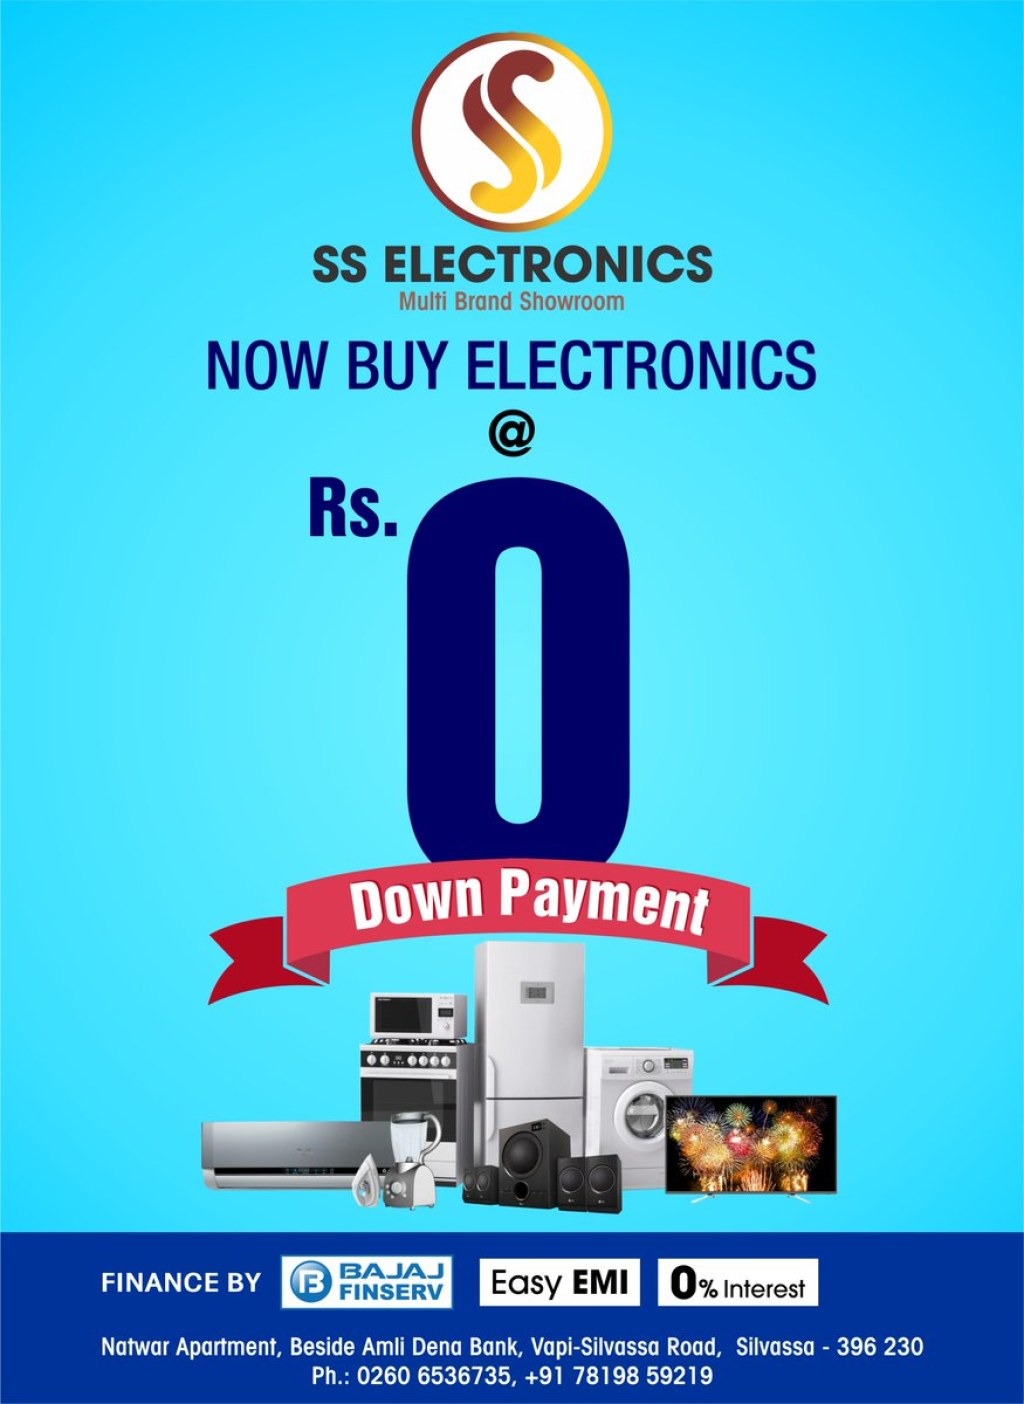 Picture of: S S Electronics on X: “Now buy electronics by paying only Rs